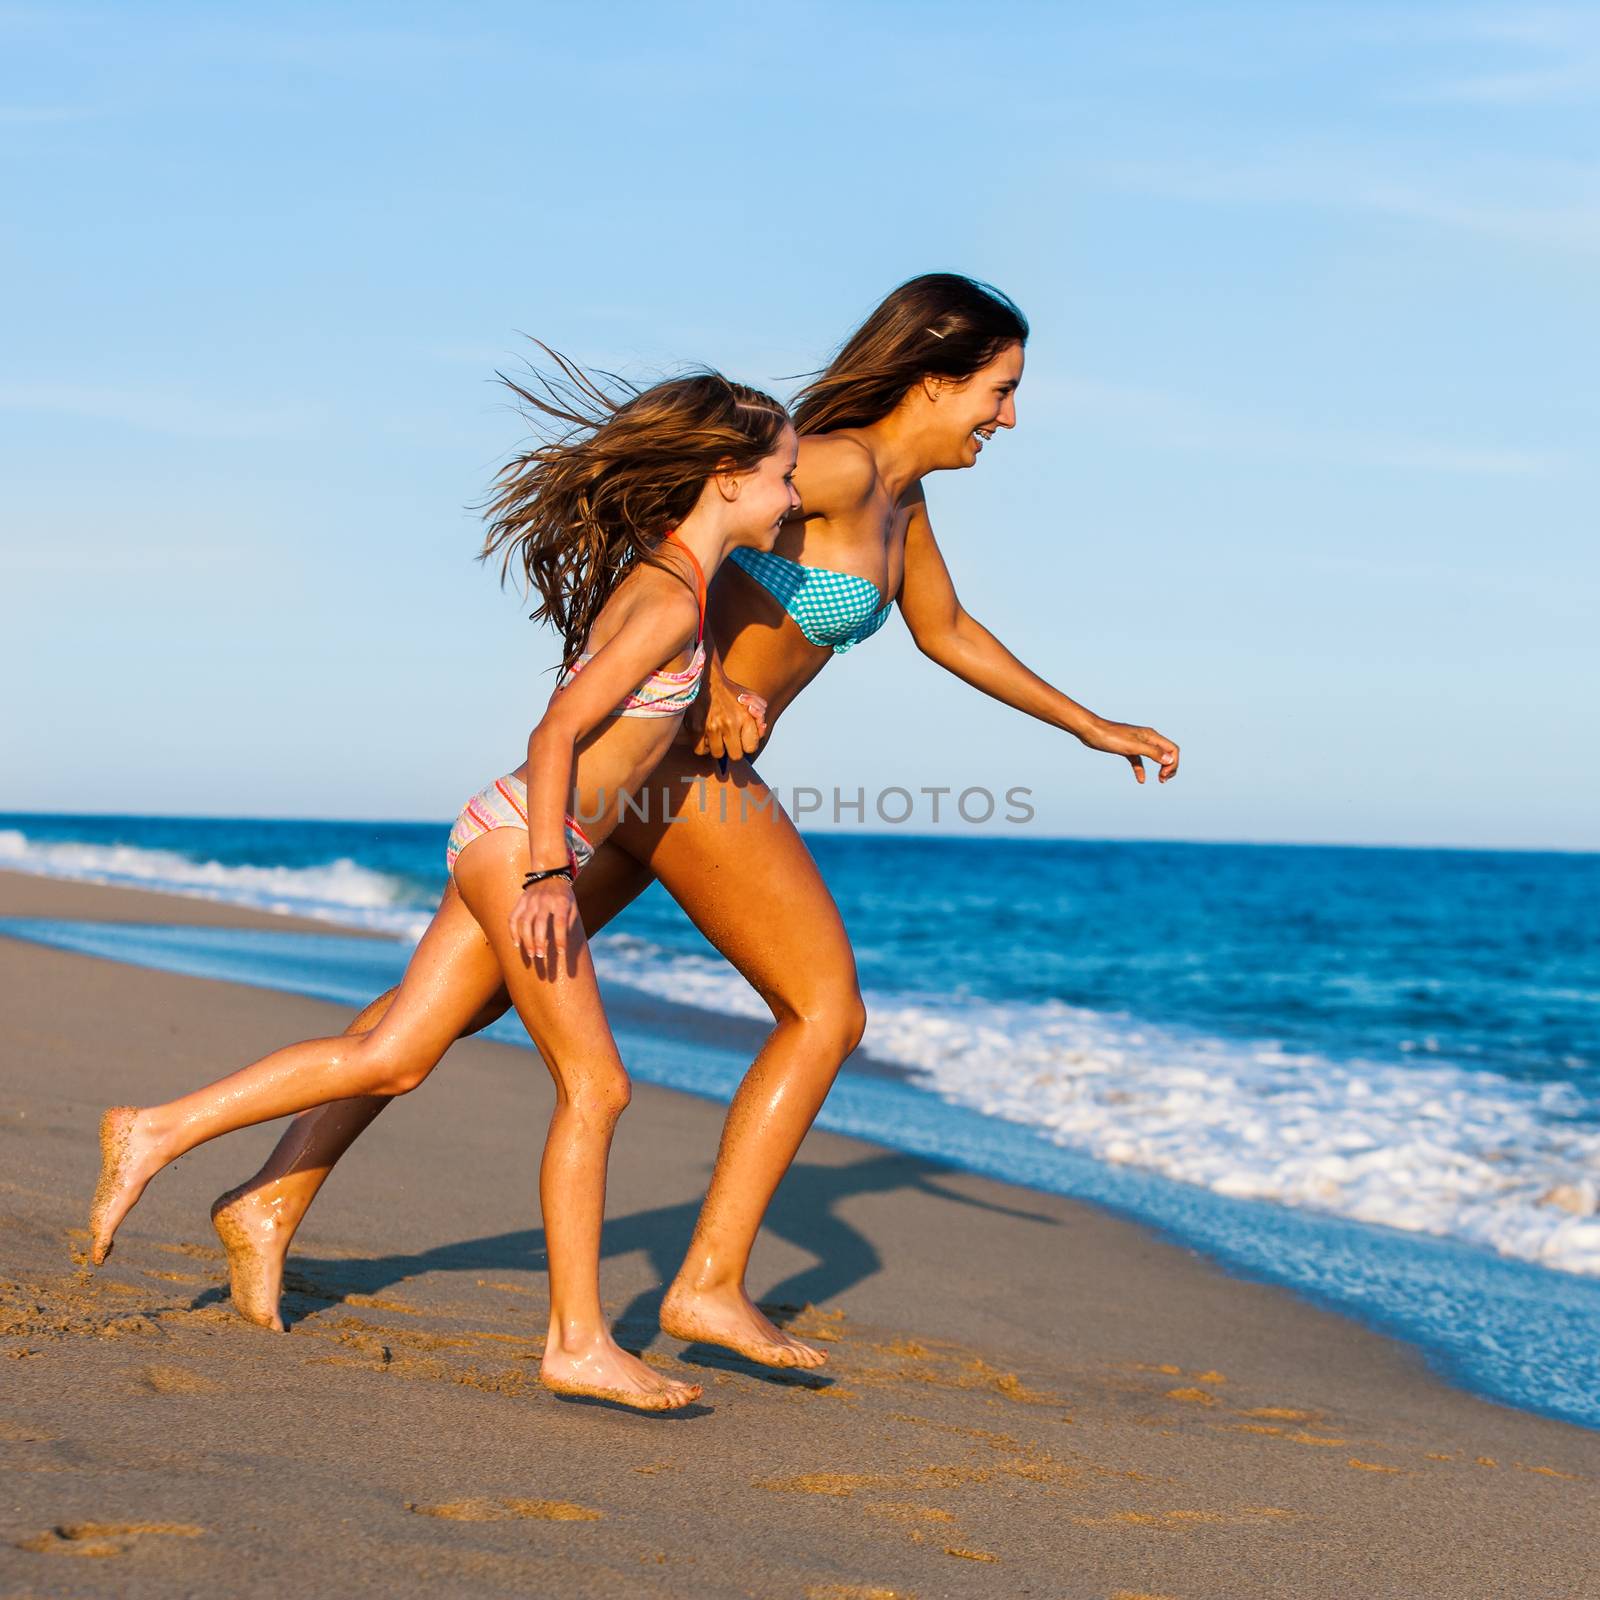 Young Mother running with daughter on beach. by karelnoppe